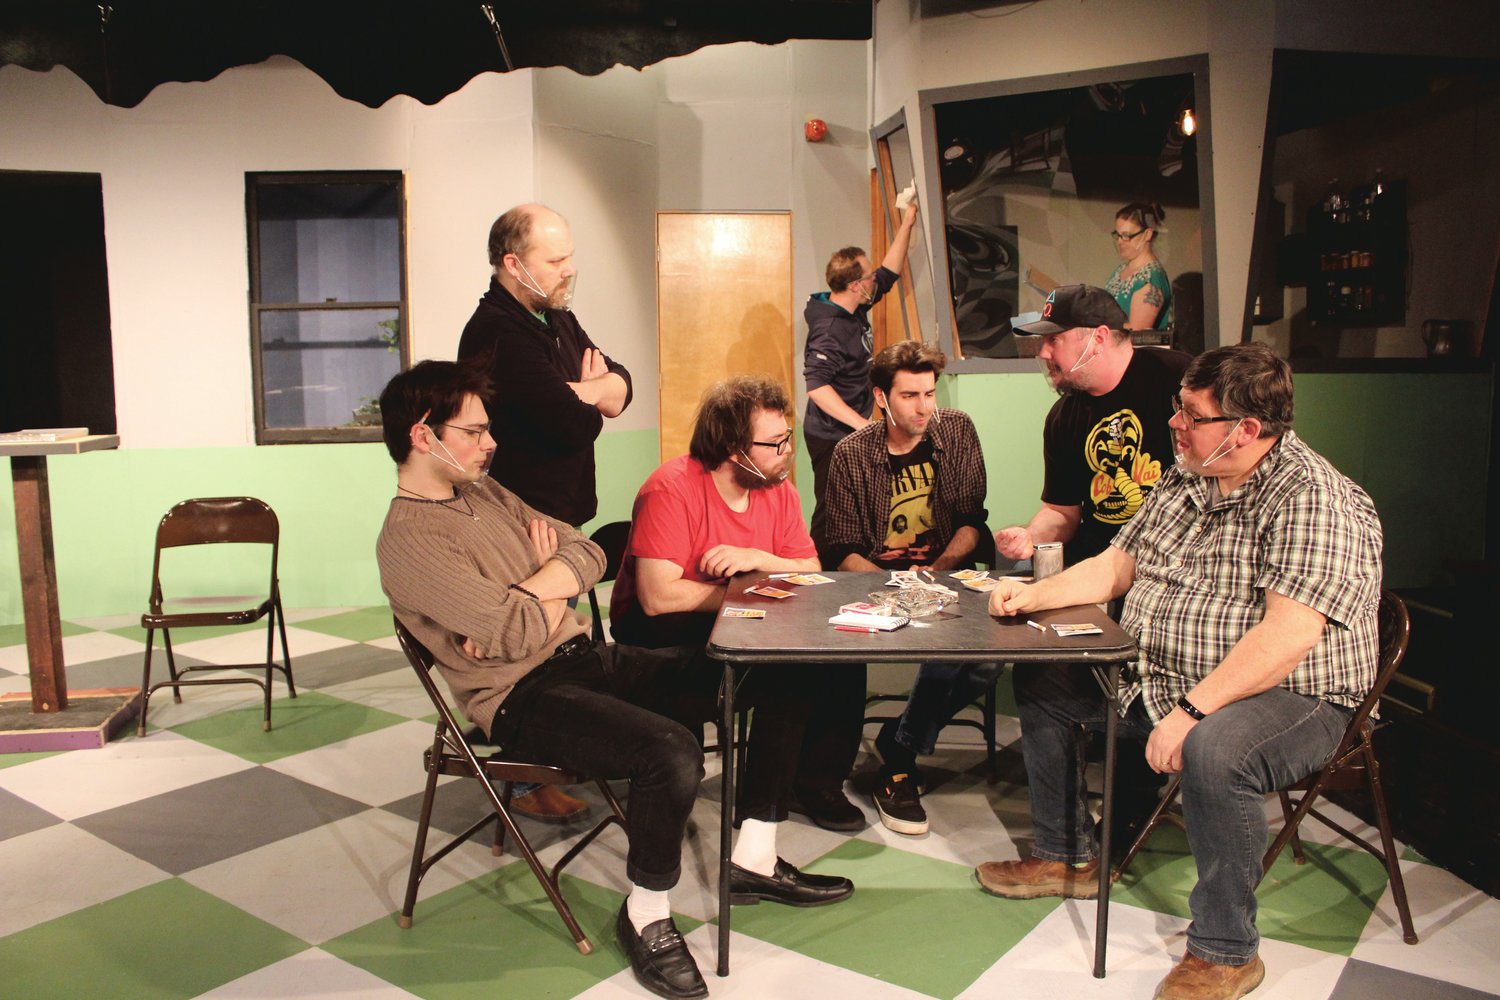 Randle P. McMurphy (portrayed by Ryan Holmberg) plays cards with fellow residents (from left to right) Cheswick (portrayed by Jordan Baker), Dale Harding (portrayed by Isaac McKenzieSullivan), Scanlon (portrayed by Nick Hall), Billy Bibbit (portrayed by Chris Bolduc) and Martini (portrayed by Dave Marsh) as Aide Warren (portrayed by Steven Walker) and Nurse Ratched (portrayed by Danielle Kays) look on in "One Flew Over the Cuckoo's Nest" opening at Centralia's Evergreen Playhouse Friday.